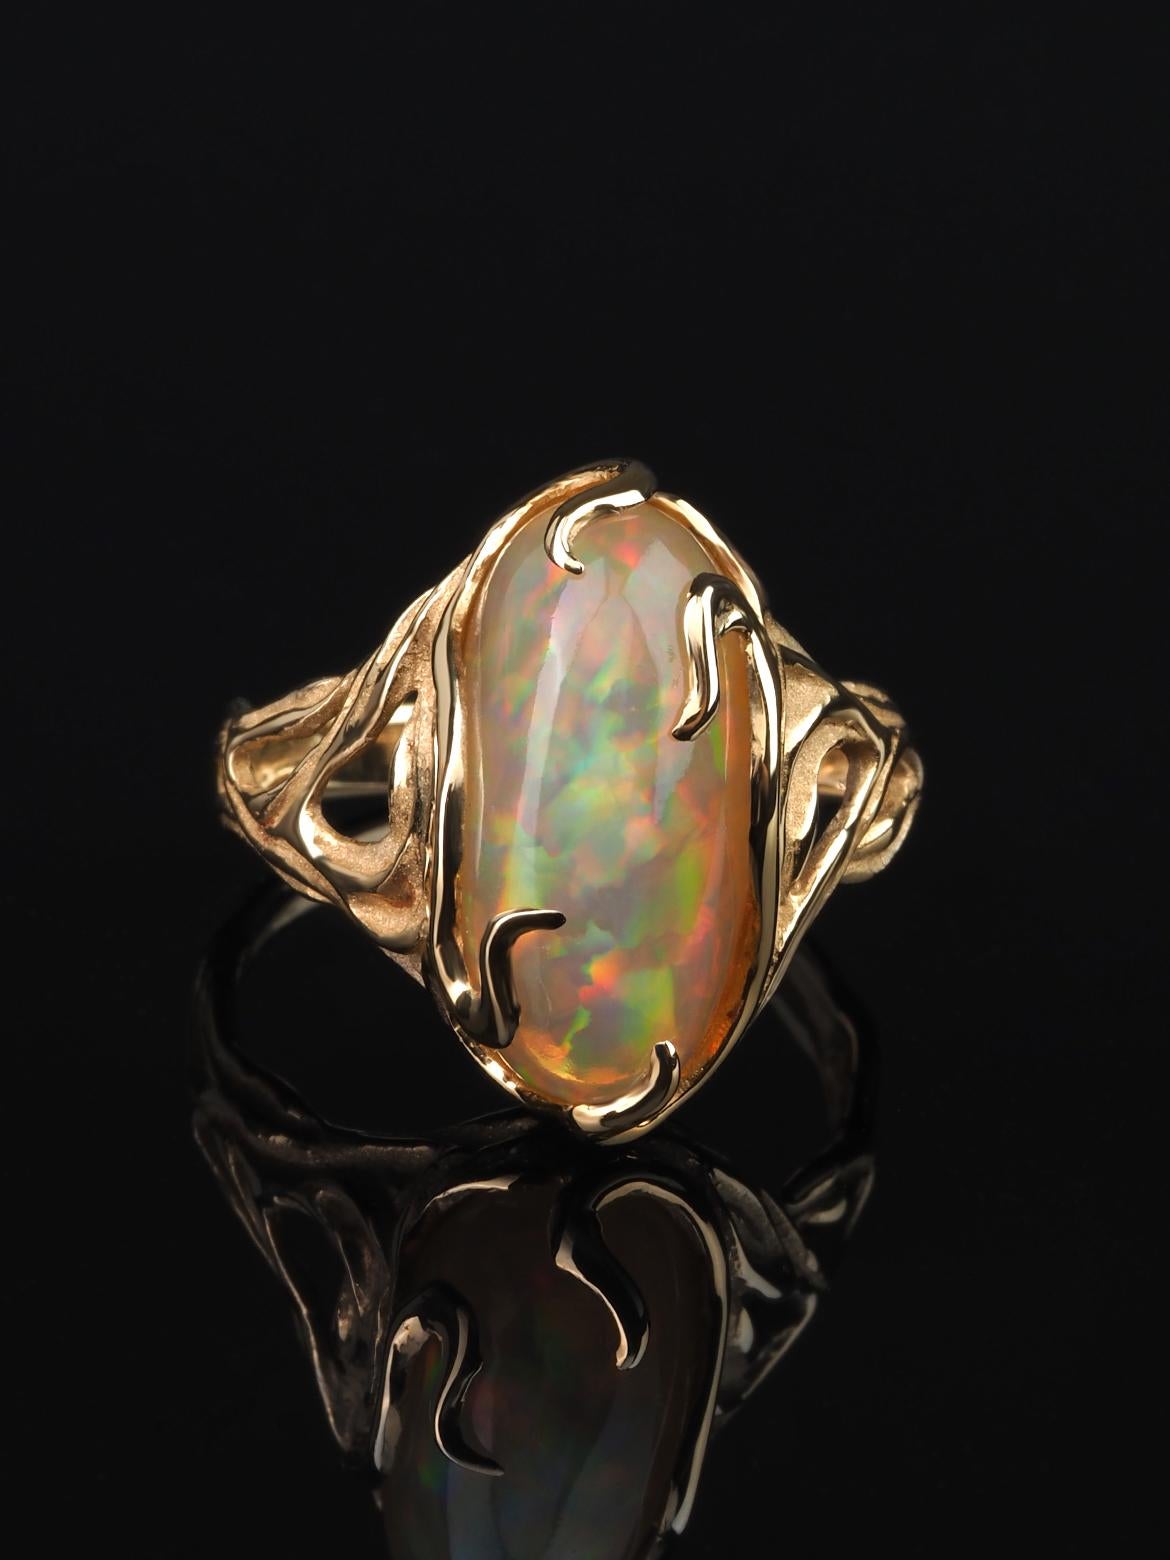 14K yellow gold ring with natural Opal  
opal origin - Ethiopia 
opal measurements - 0.28 х 0.31 х 0.71 in / 7 х 8 х 18 mm
stone weight - 5.80 carats
ring weight - 5 grams
ring size - 7.25 US

We ship our jewelry worldwide – for our customers it is